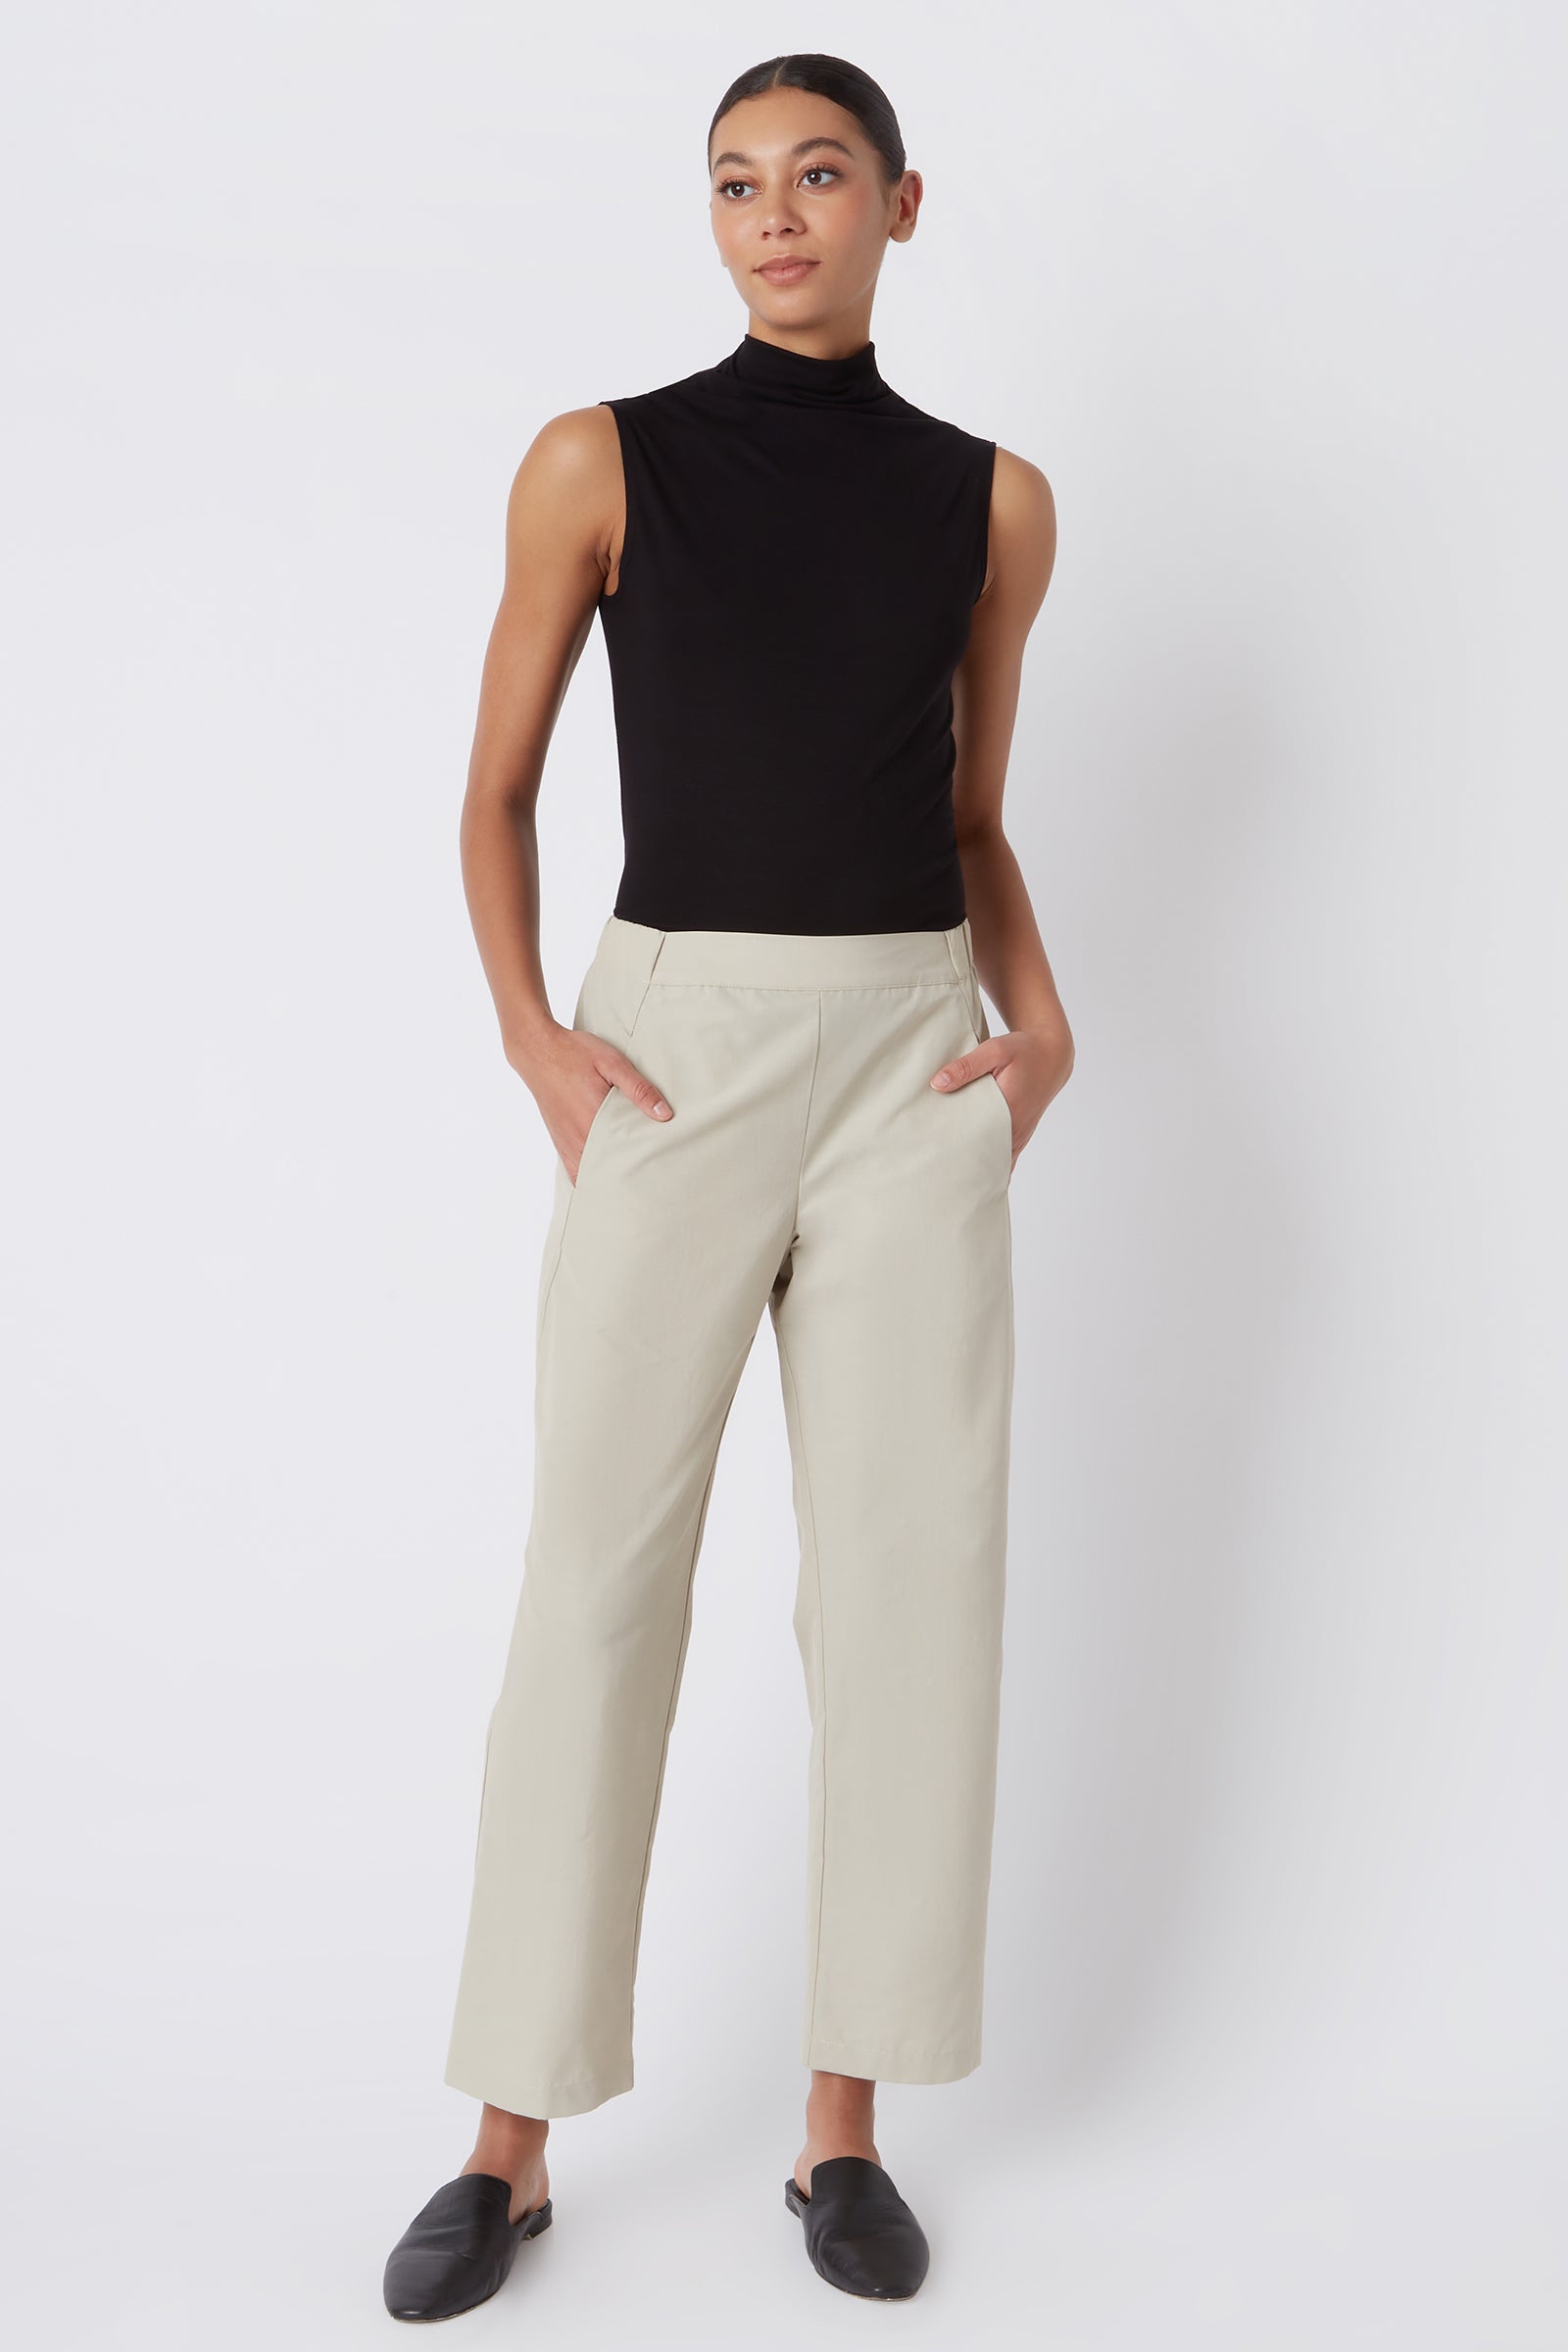 Kal Rieman Brit Crop Pant in Classic Khaki on Model with Hands in Pockets Full Front View